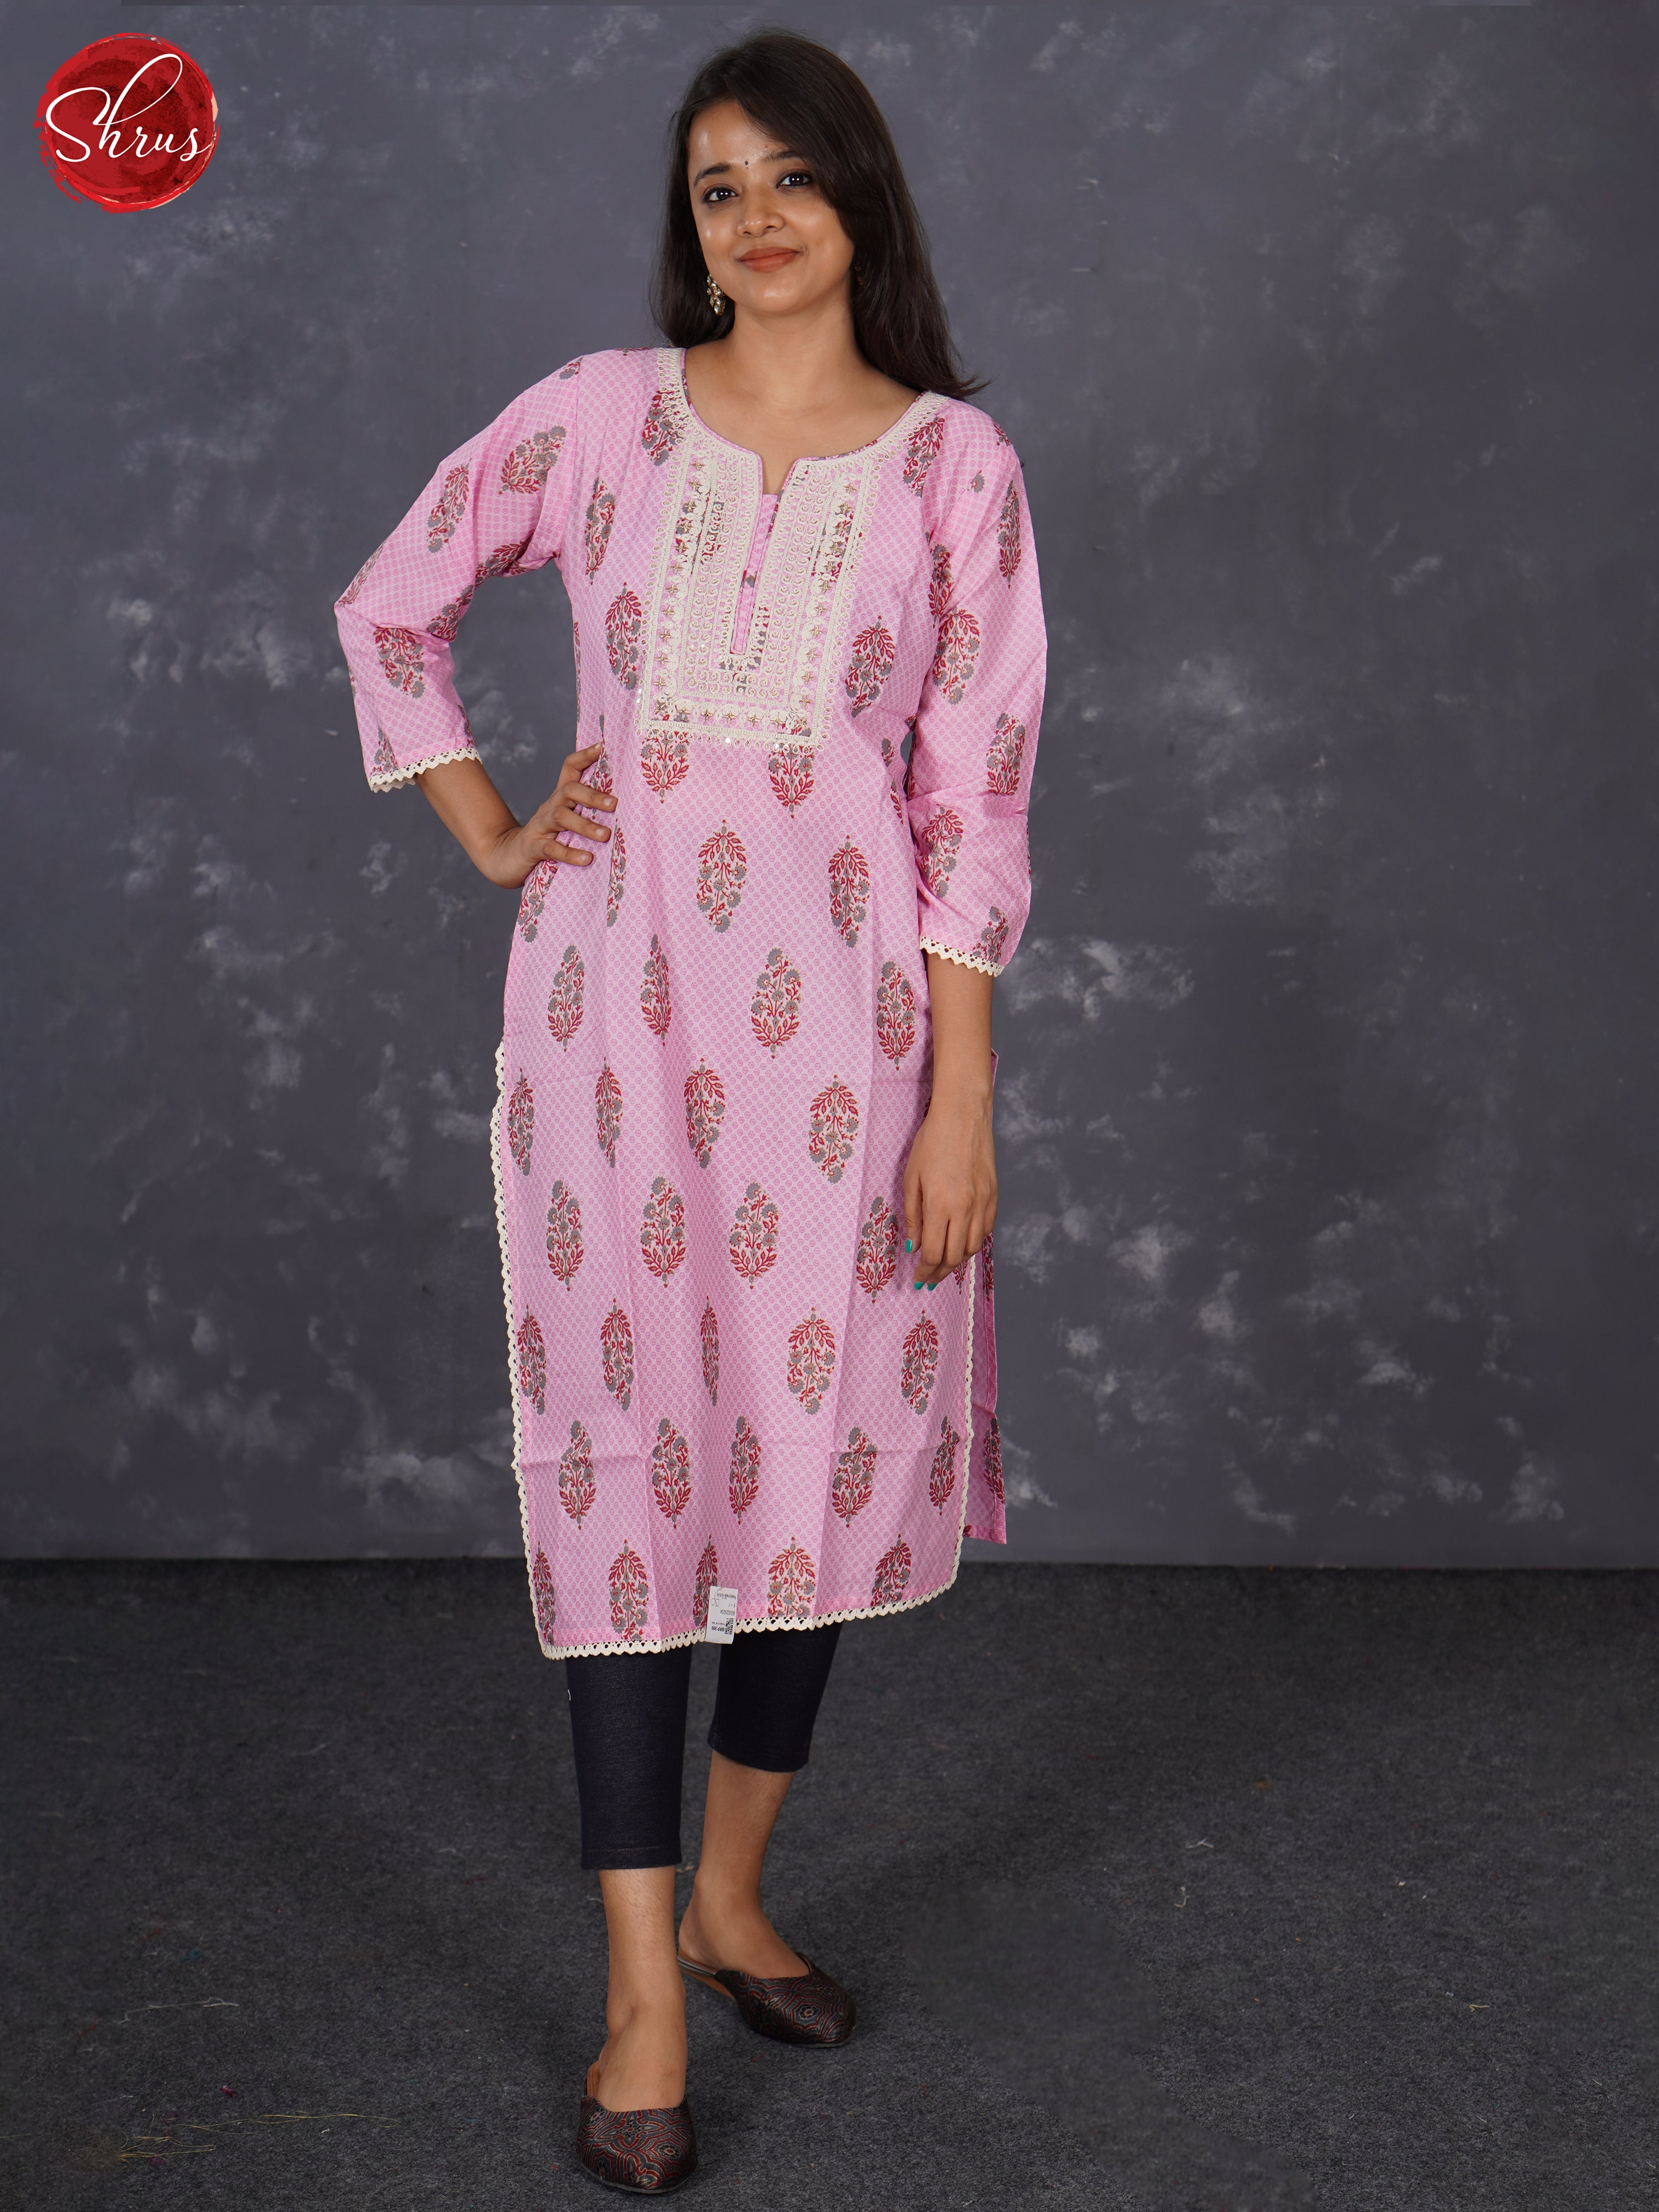 Pink - Readymade kurti top with floral print & Lace embroidery - Shop on ShrusEternity.com